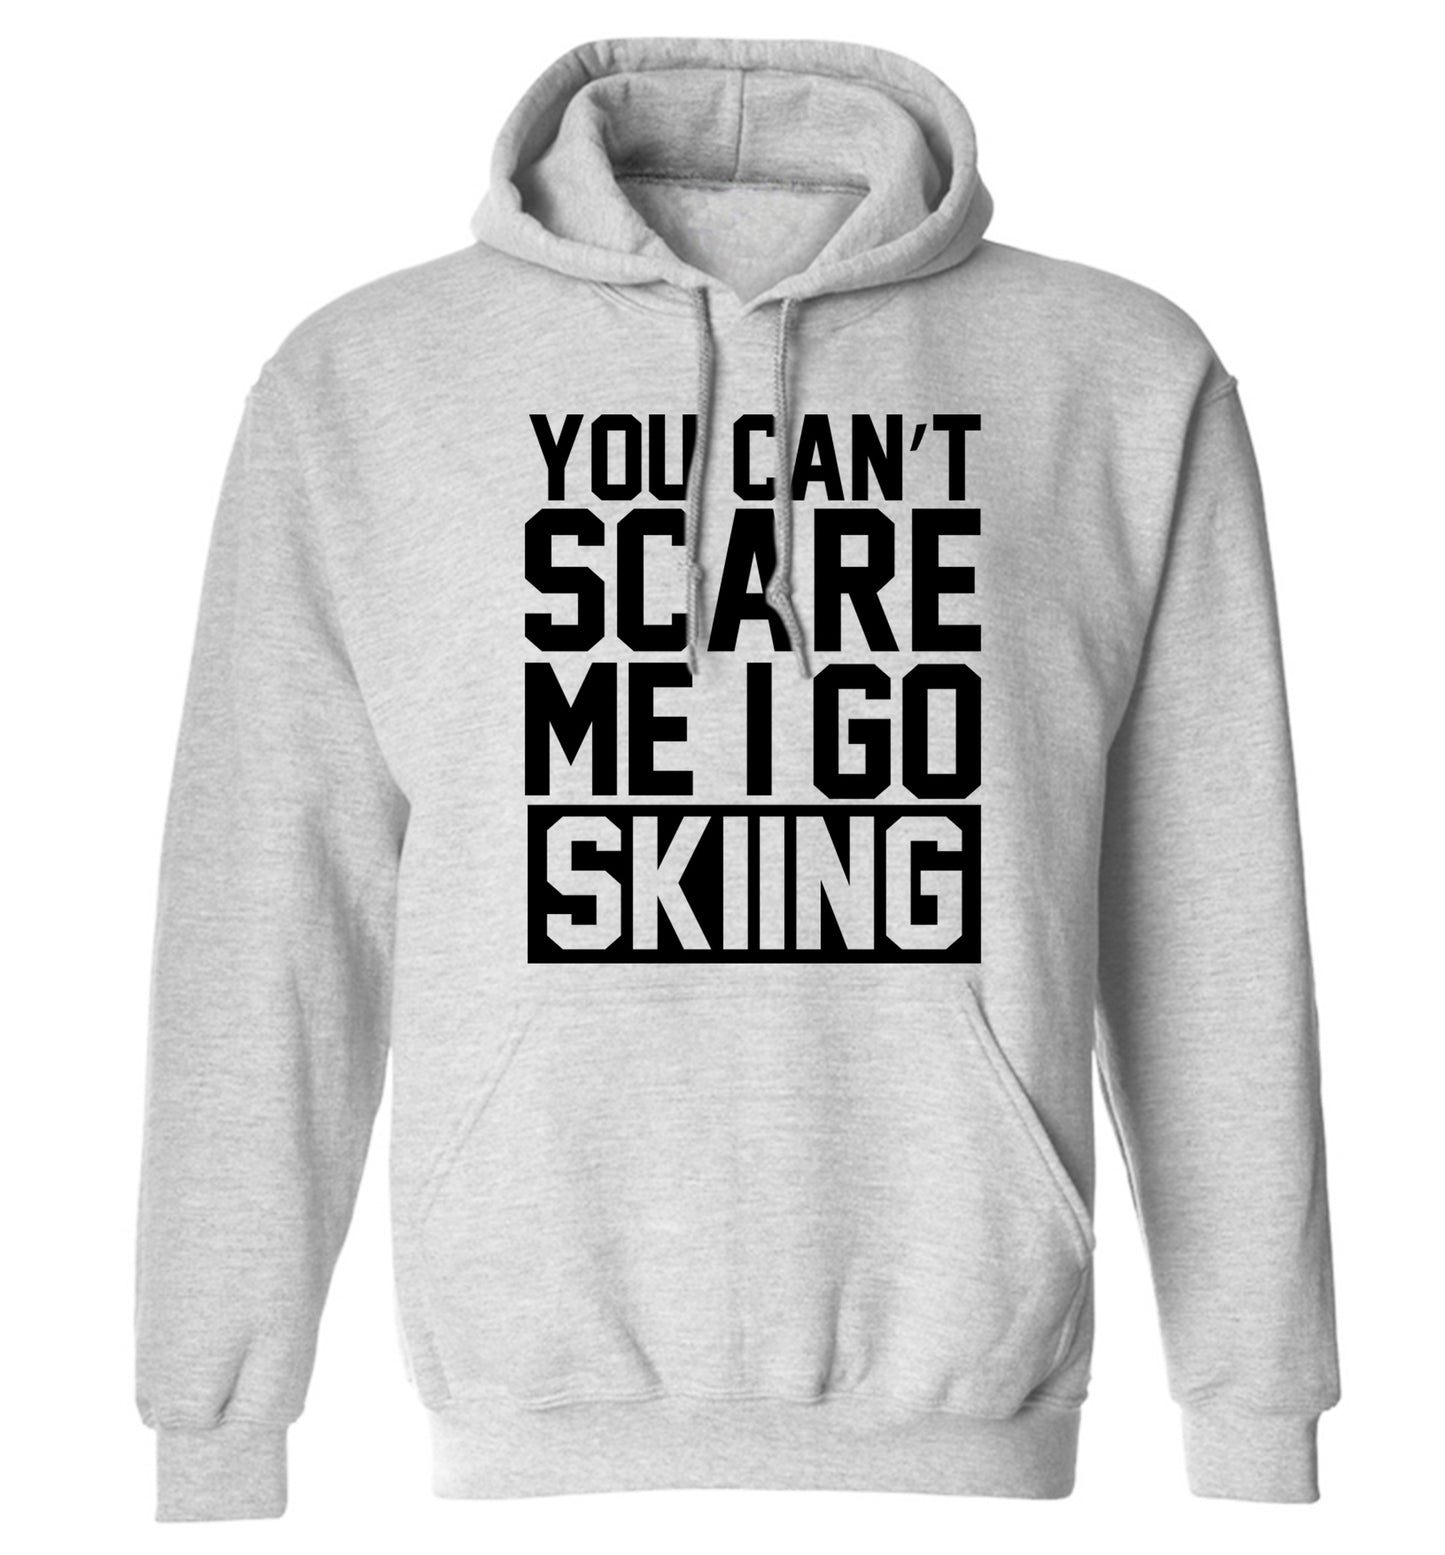 You can't scare me I go skiing adults unisex grey hoodie 2XL